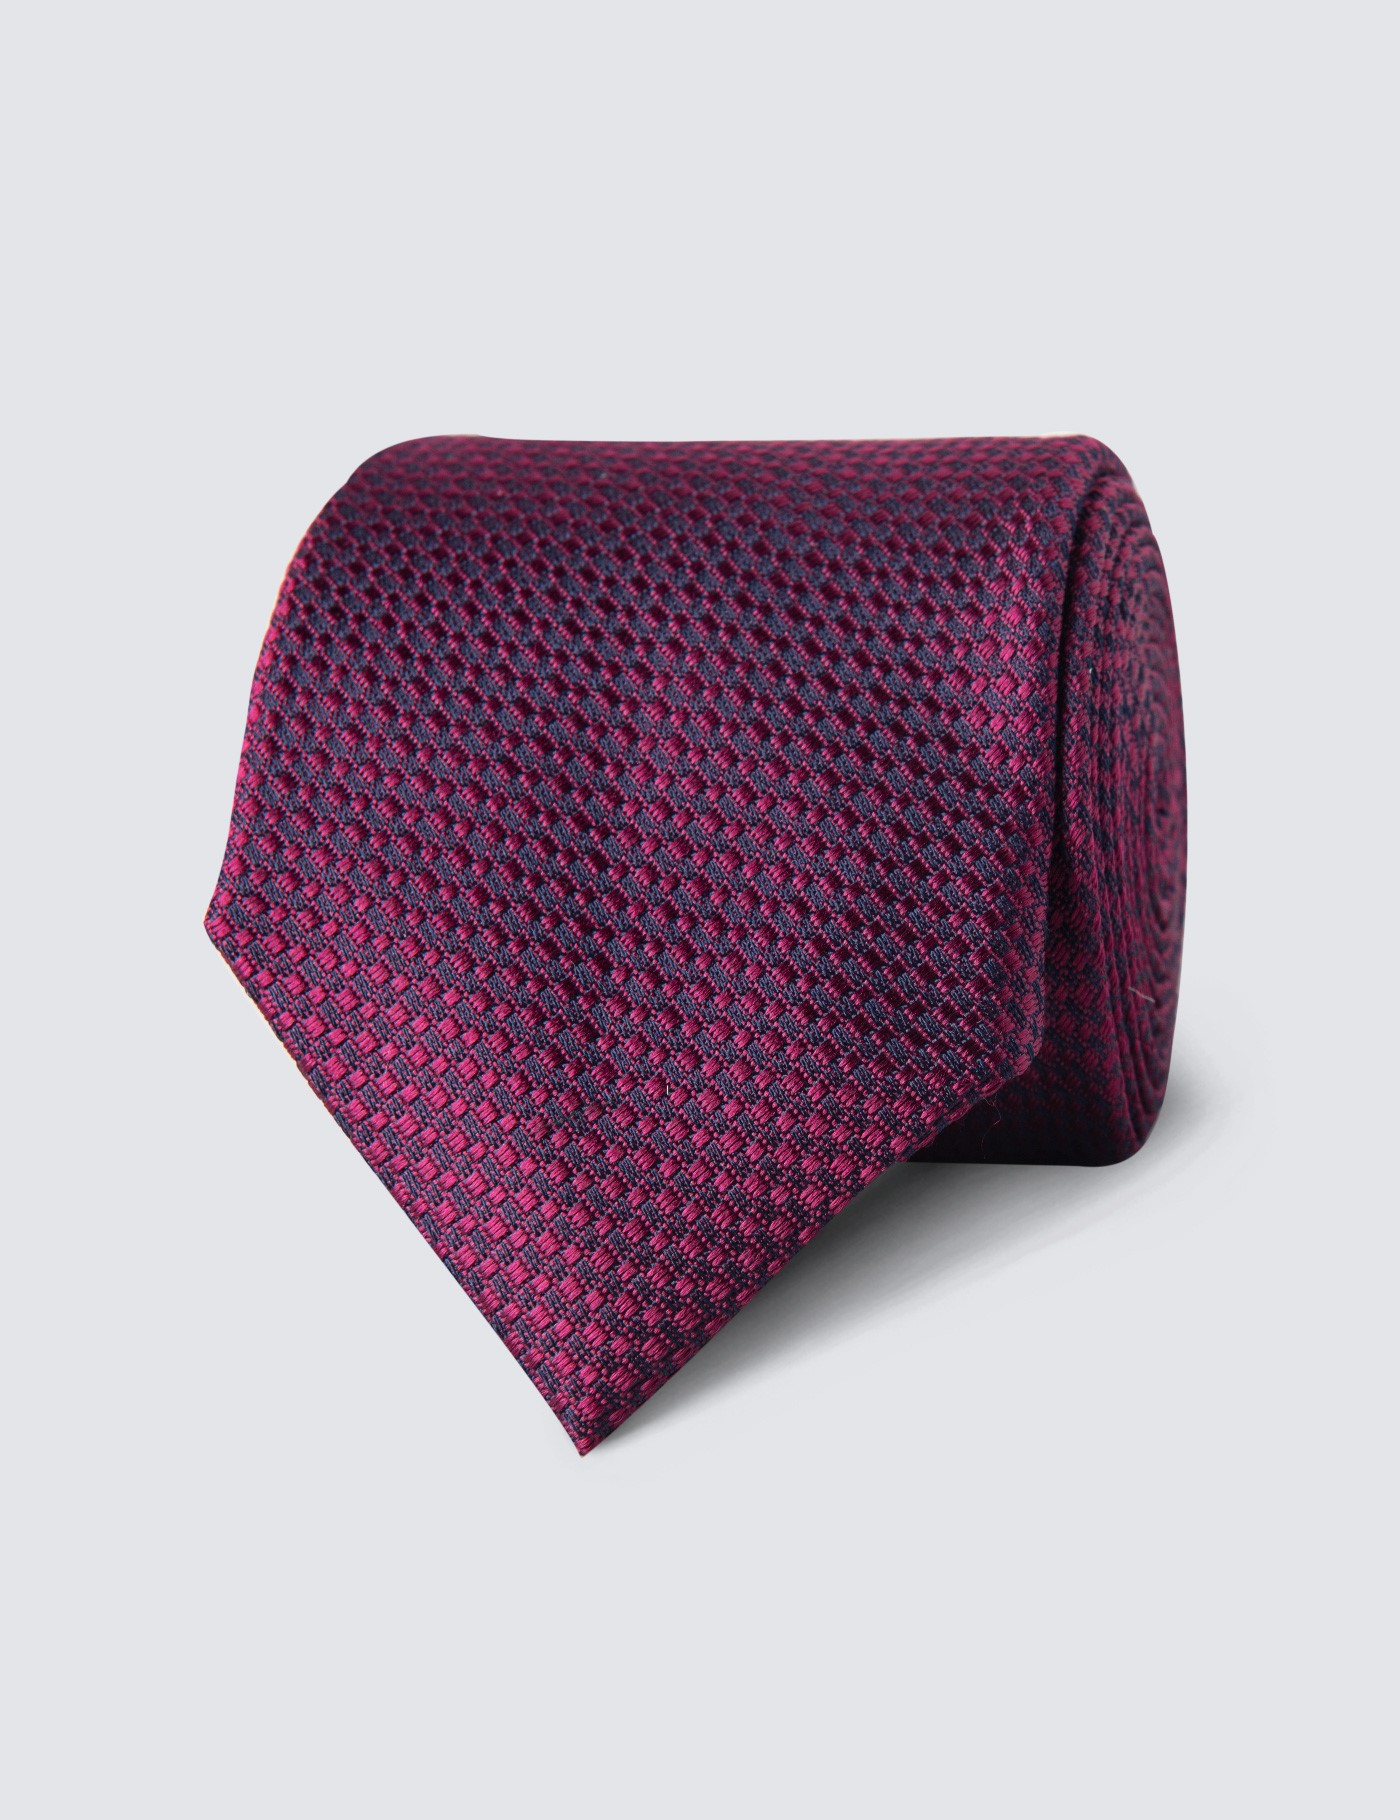 Textured Solid Red Knit Tie